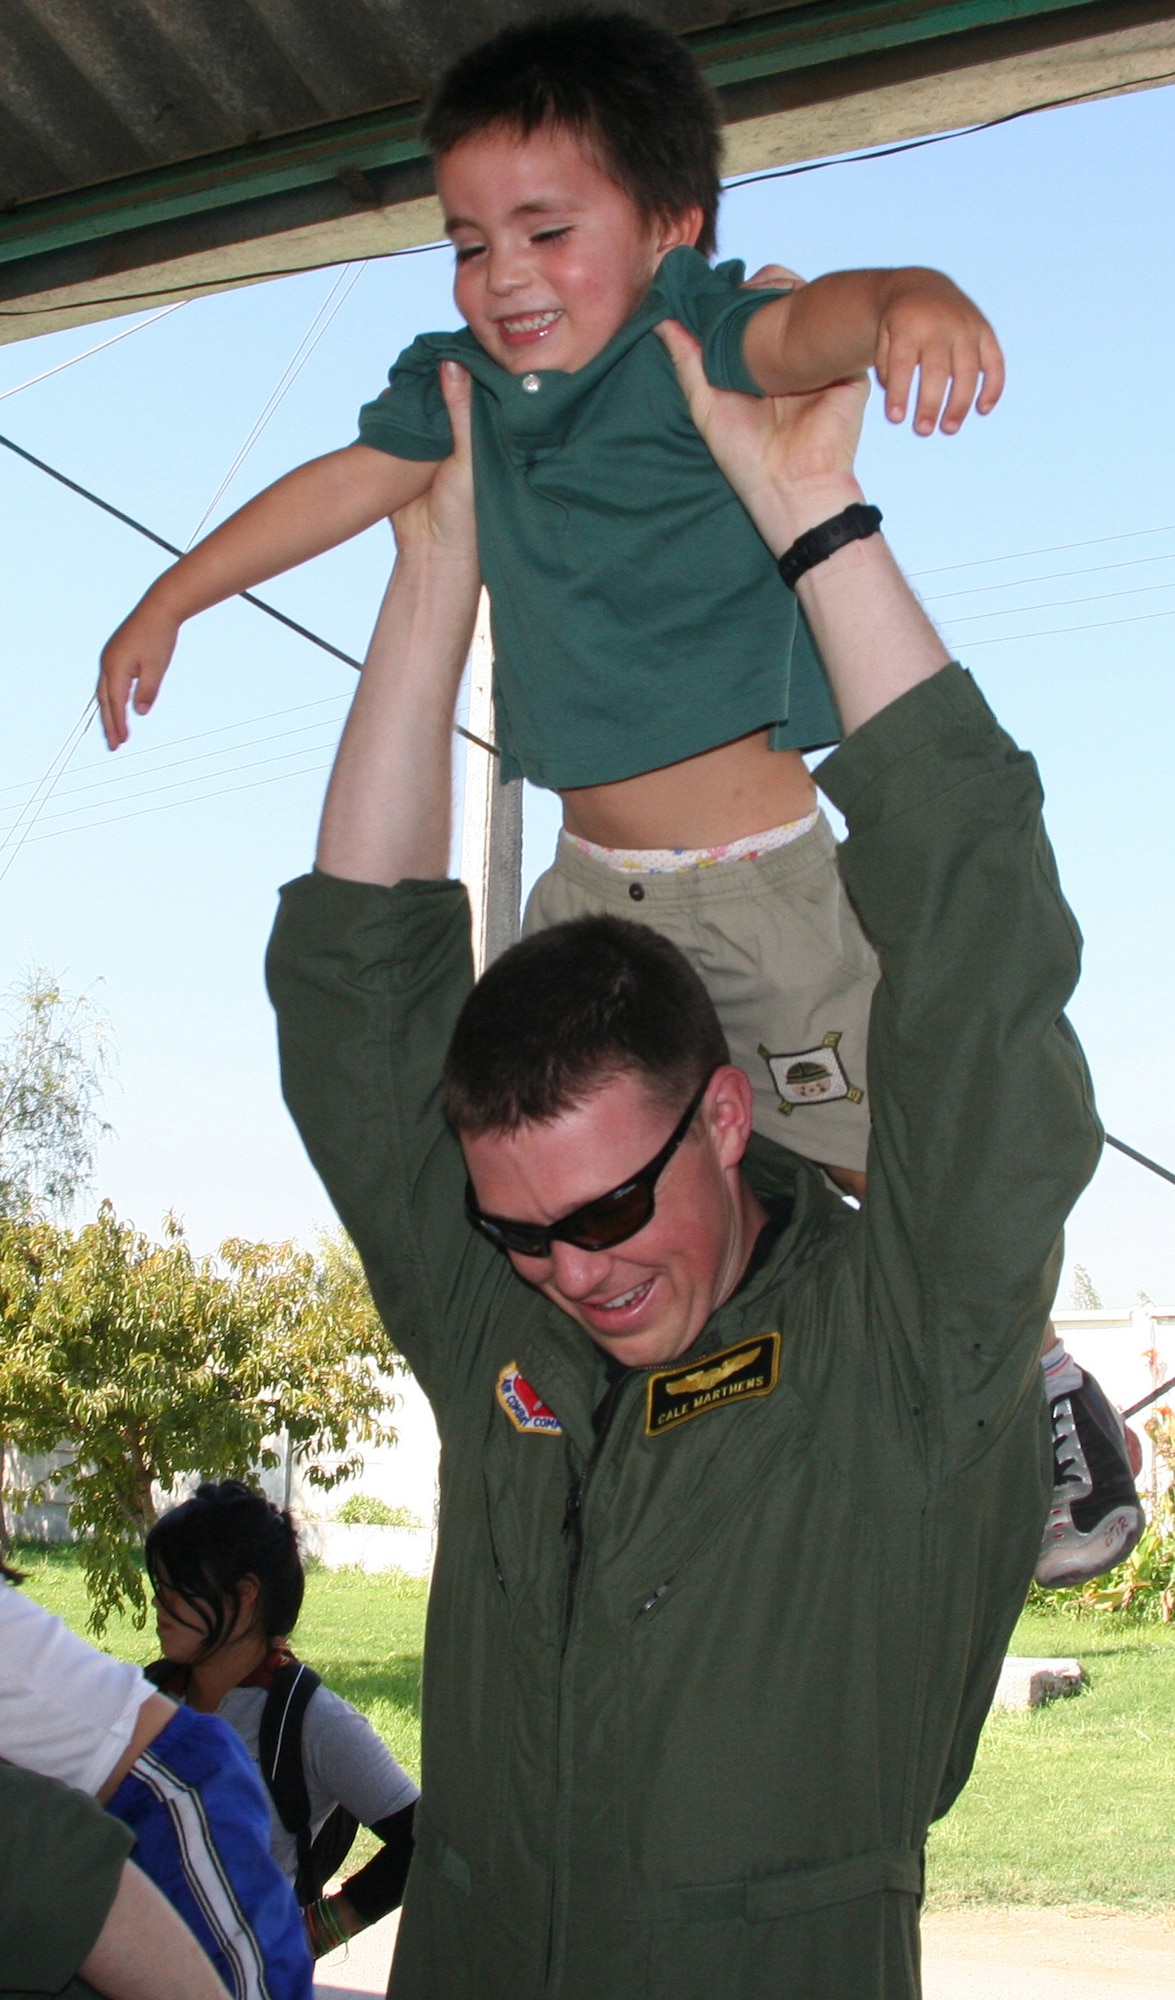 SANTIAGO, Chile – Capt. Cale Marthens, 391st Fighter Squadron, lifts up a Chilean orphan April 3 as part of an Air Forces Southern visit to Koinomadelfia Orphanage west of Santiago. Twenty Airmen here showcasing their aircraft at FIDAE, the largest airshow in South America, visited more than 30 toddlers at the orphanage and handed out toys, stickers and patches. (U.S. Air Force photo by/ 1st Lt. Candace Cutrufo)